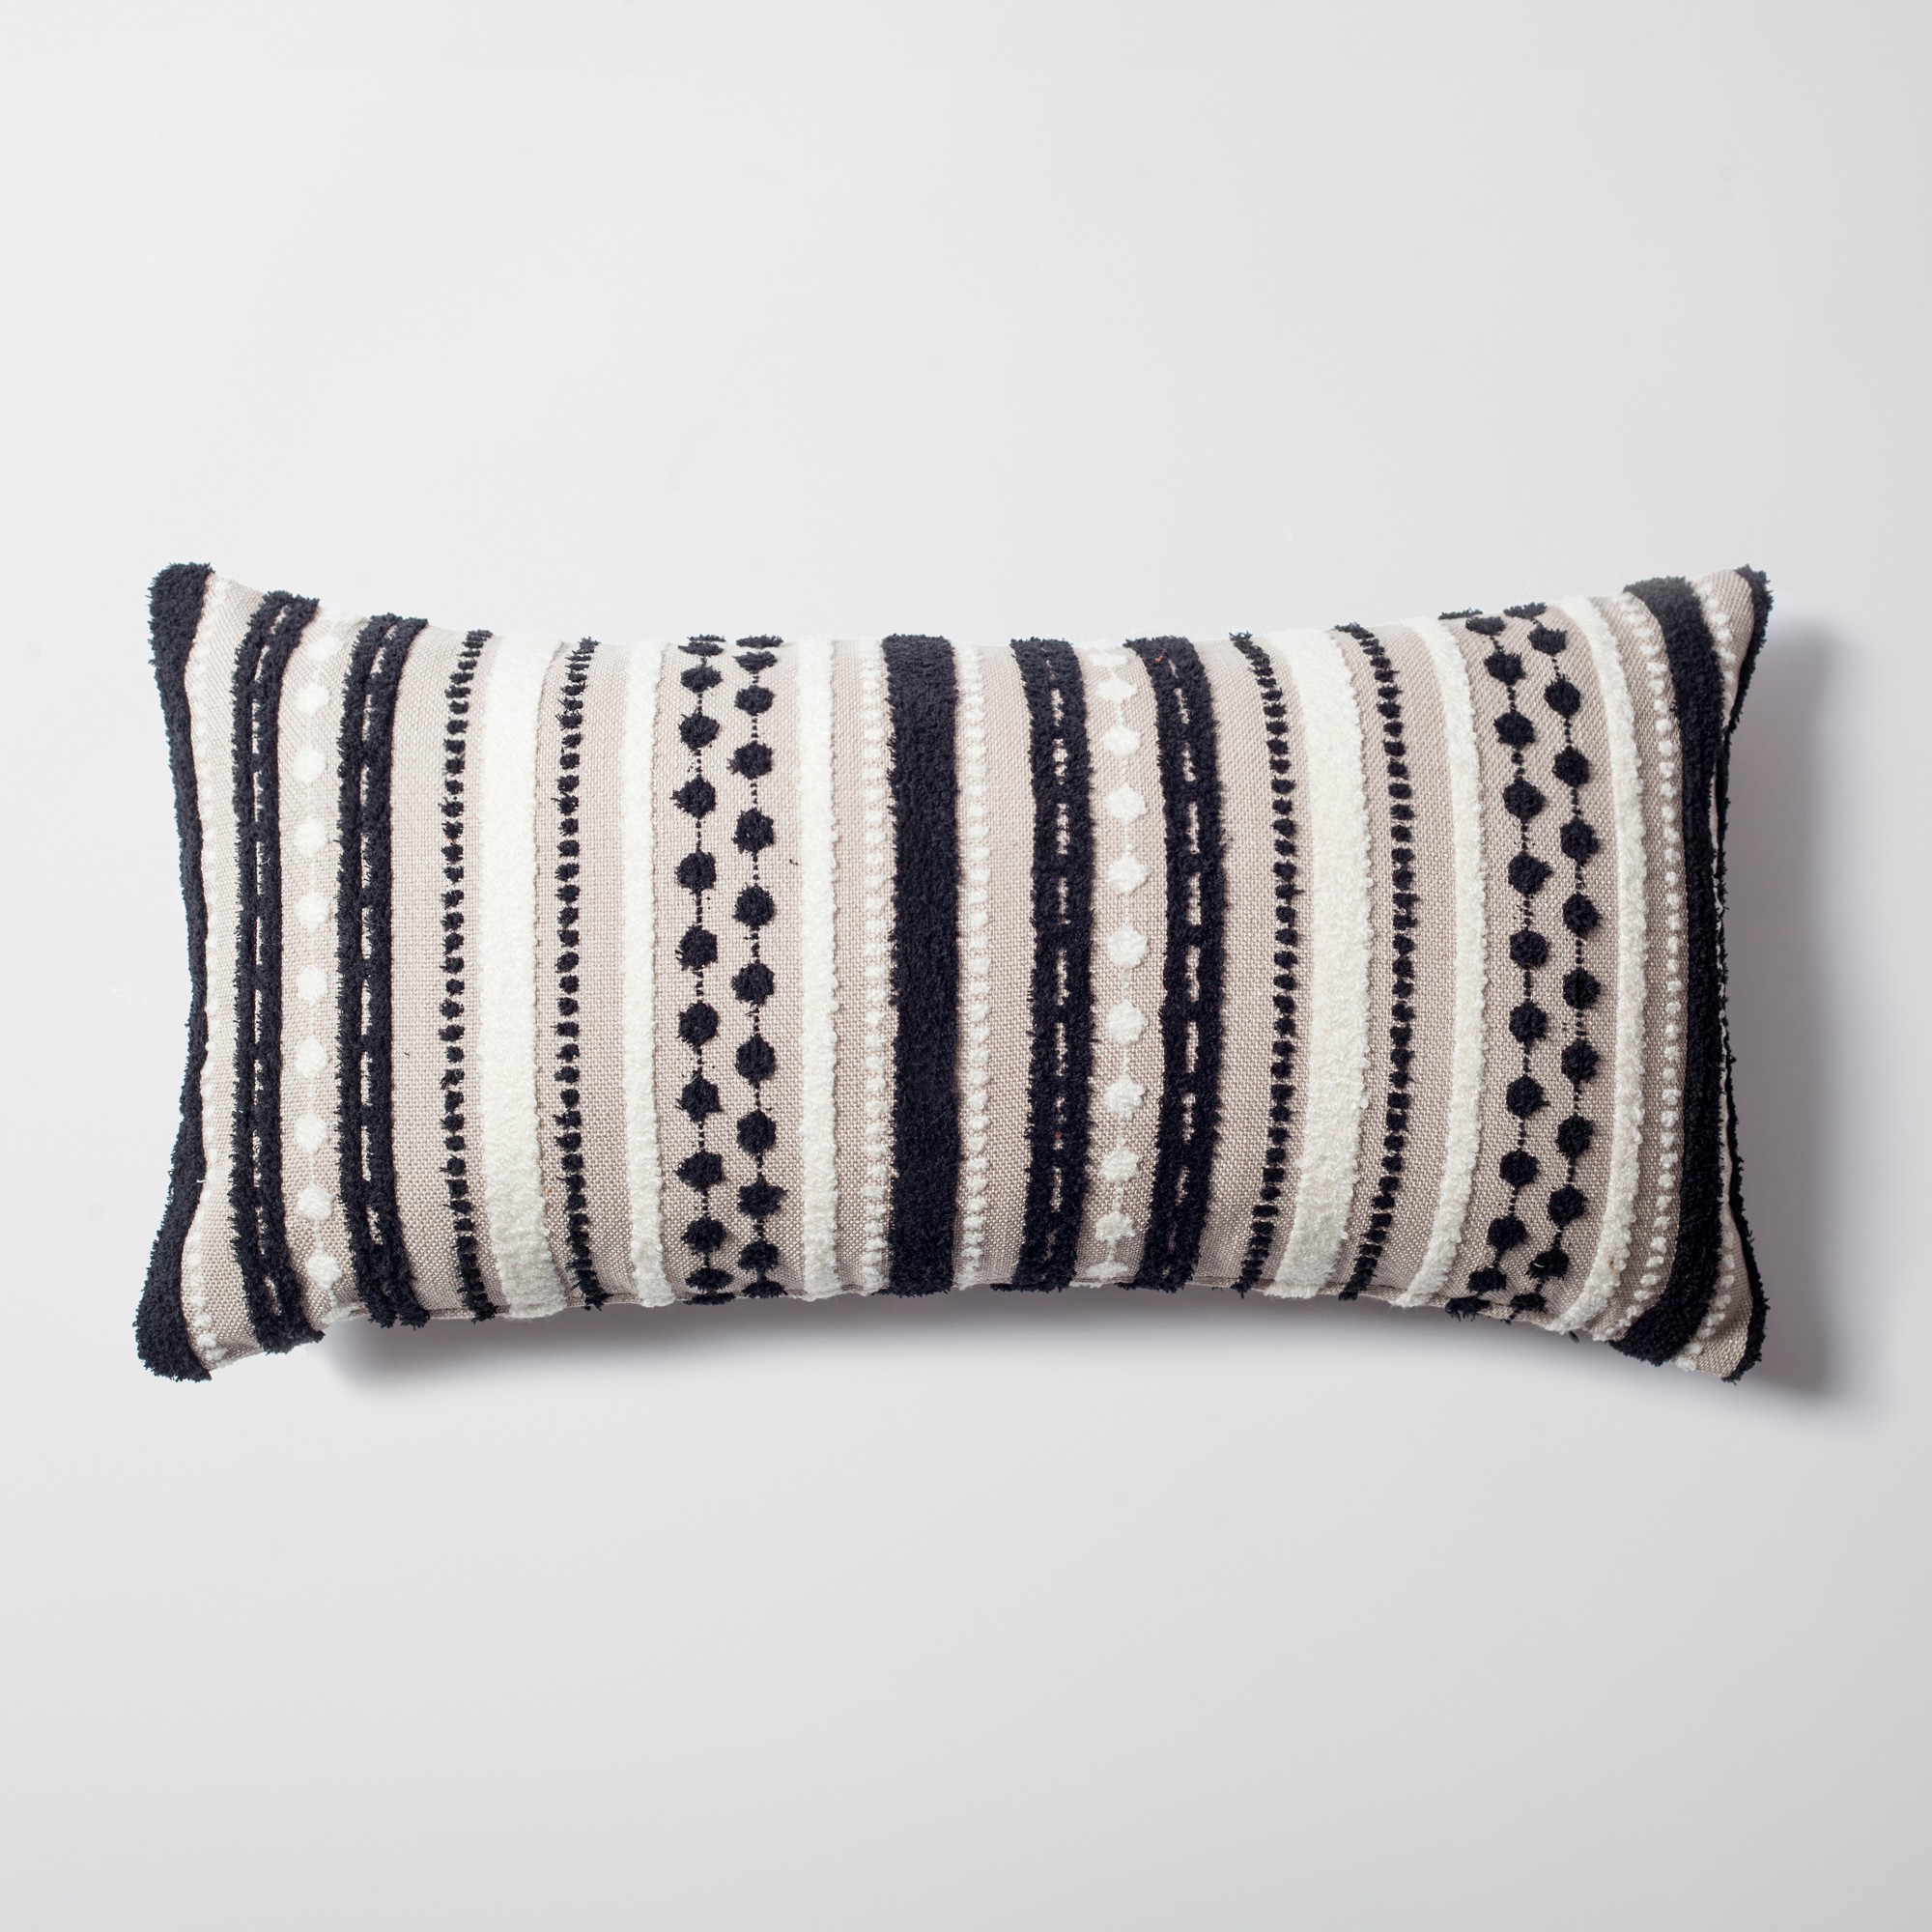 "Nomad" - Multicolored Striped Linen Decorative Pillow 14x28 Inch - Black & White (Cover Only)